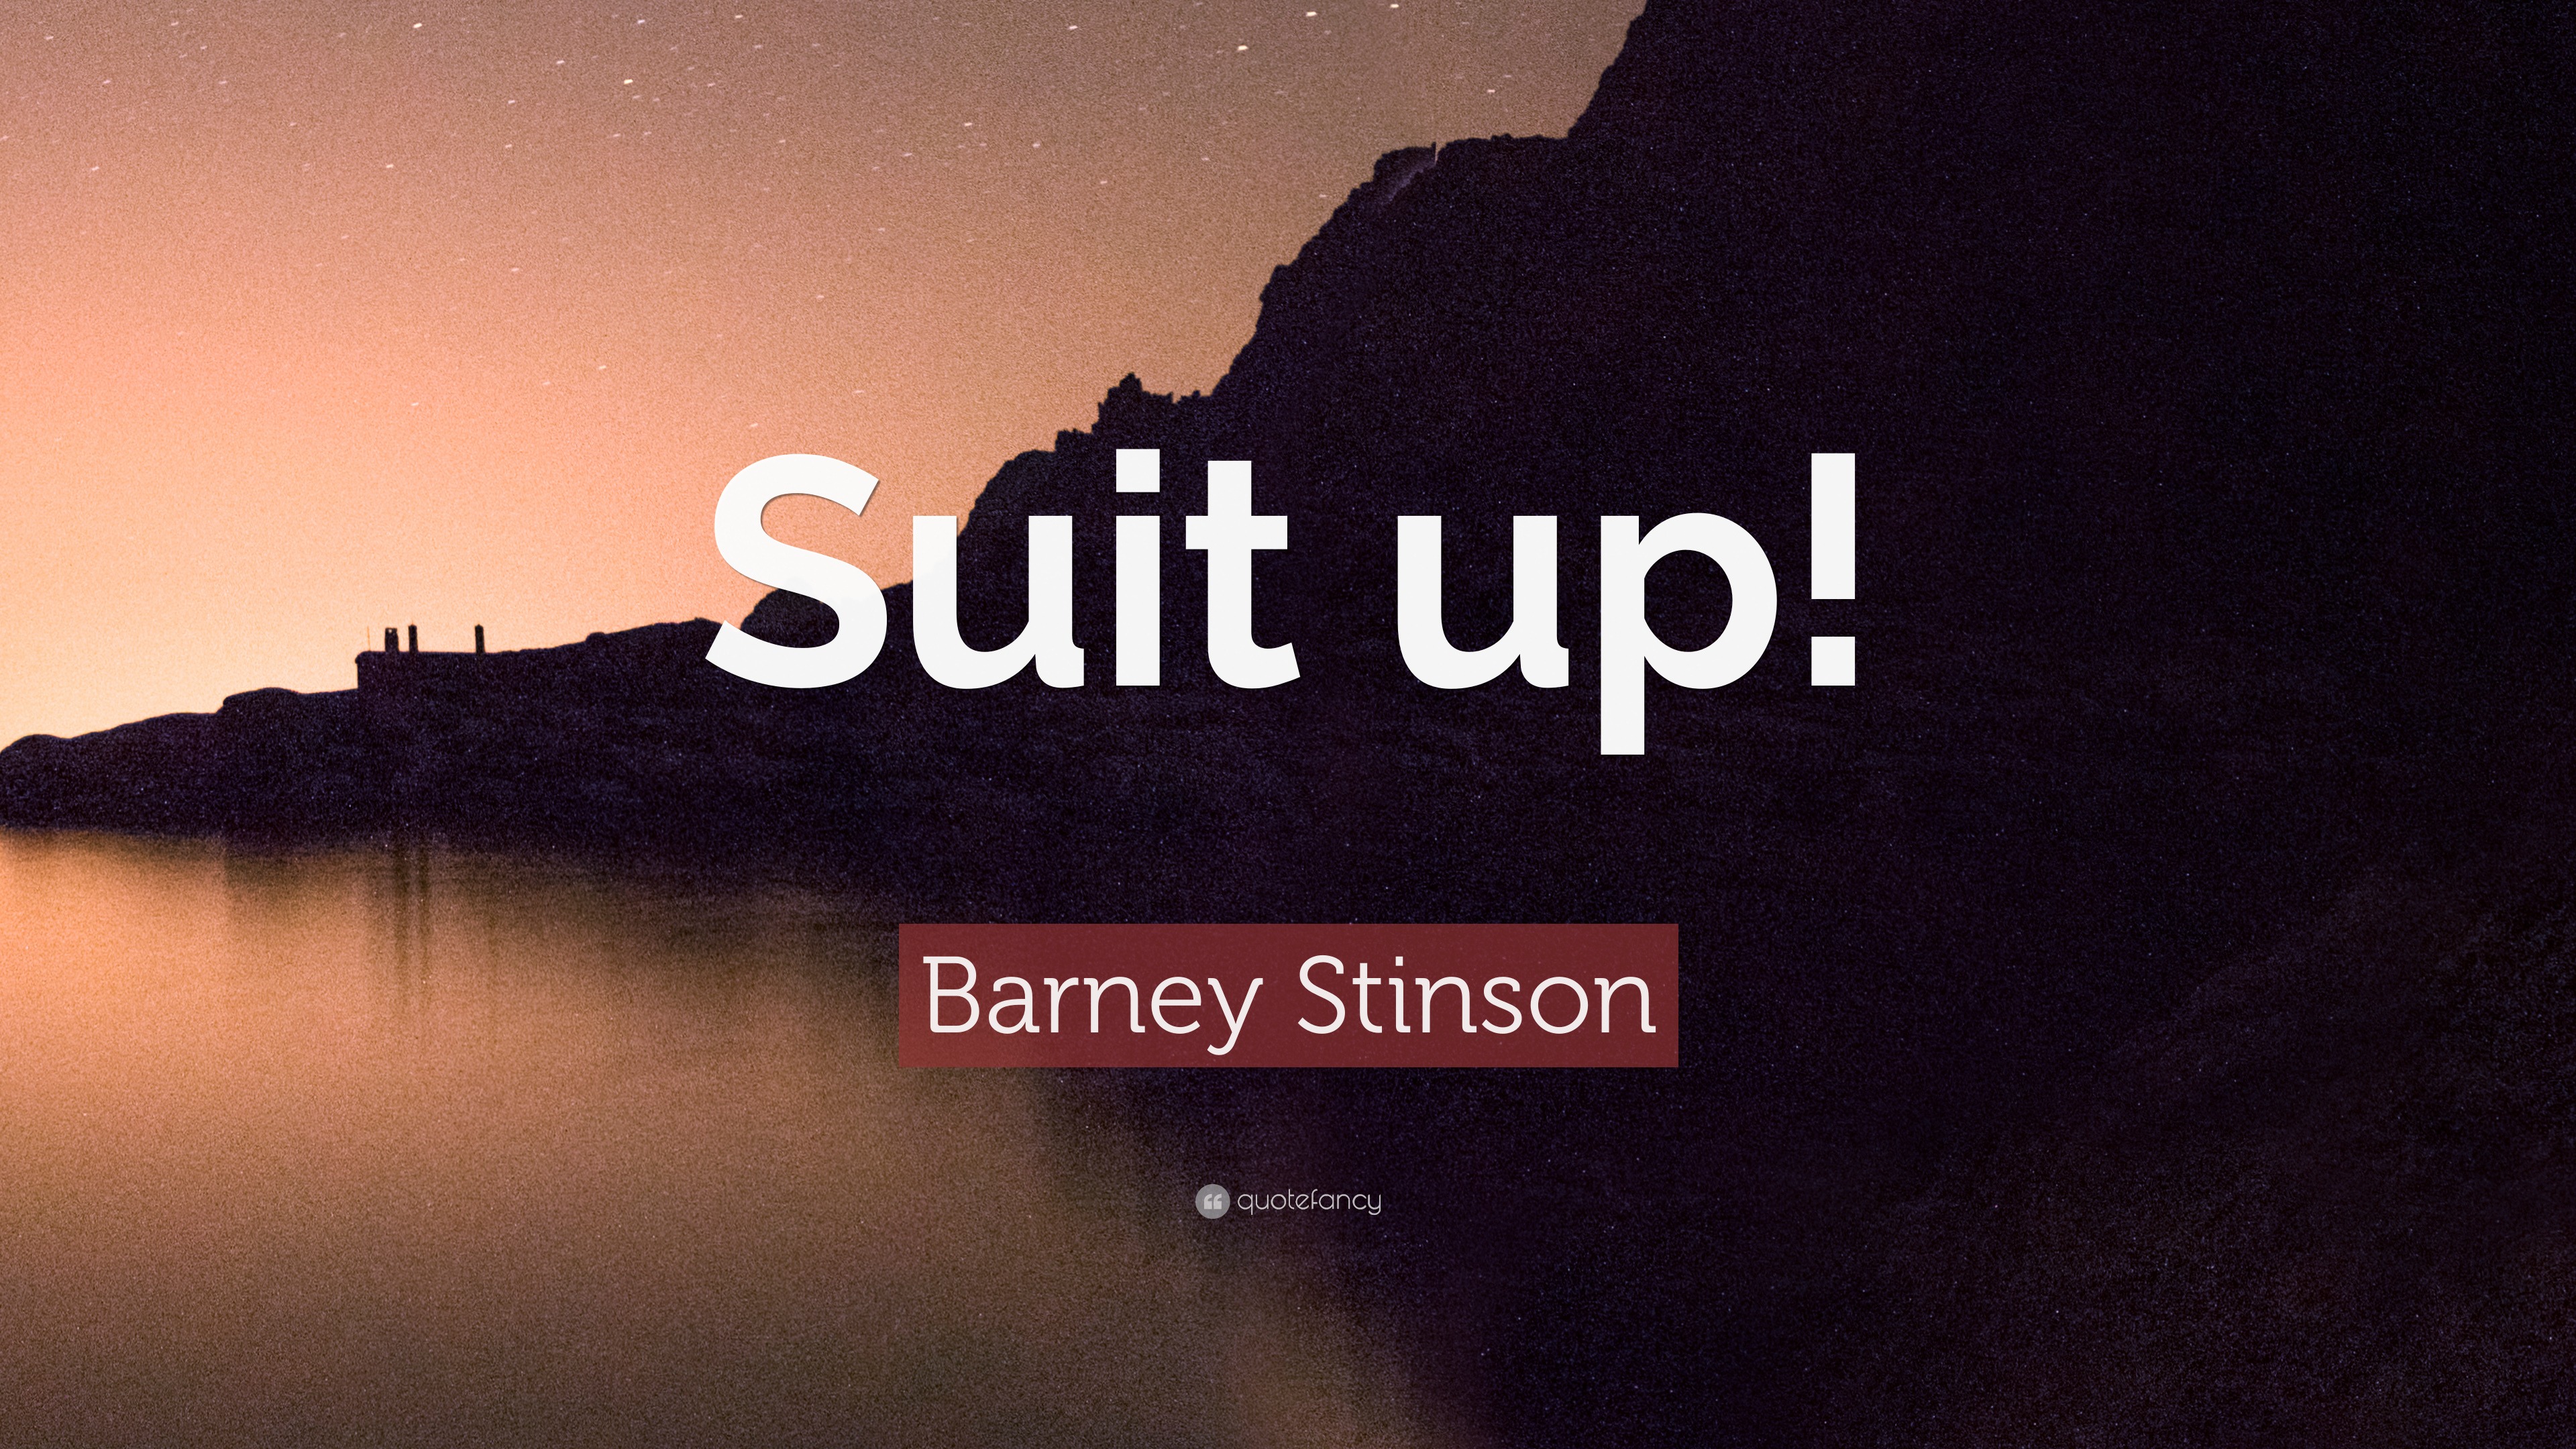 Himym Barney Stinson Suit Up Awesome Hot Trend for Poster by Pana Sorenstam  - Pixels